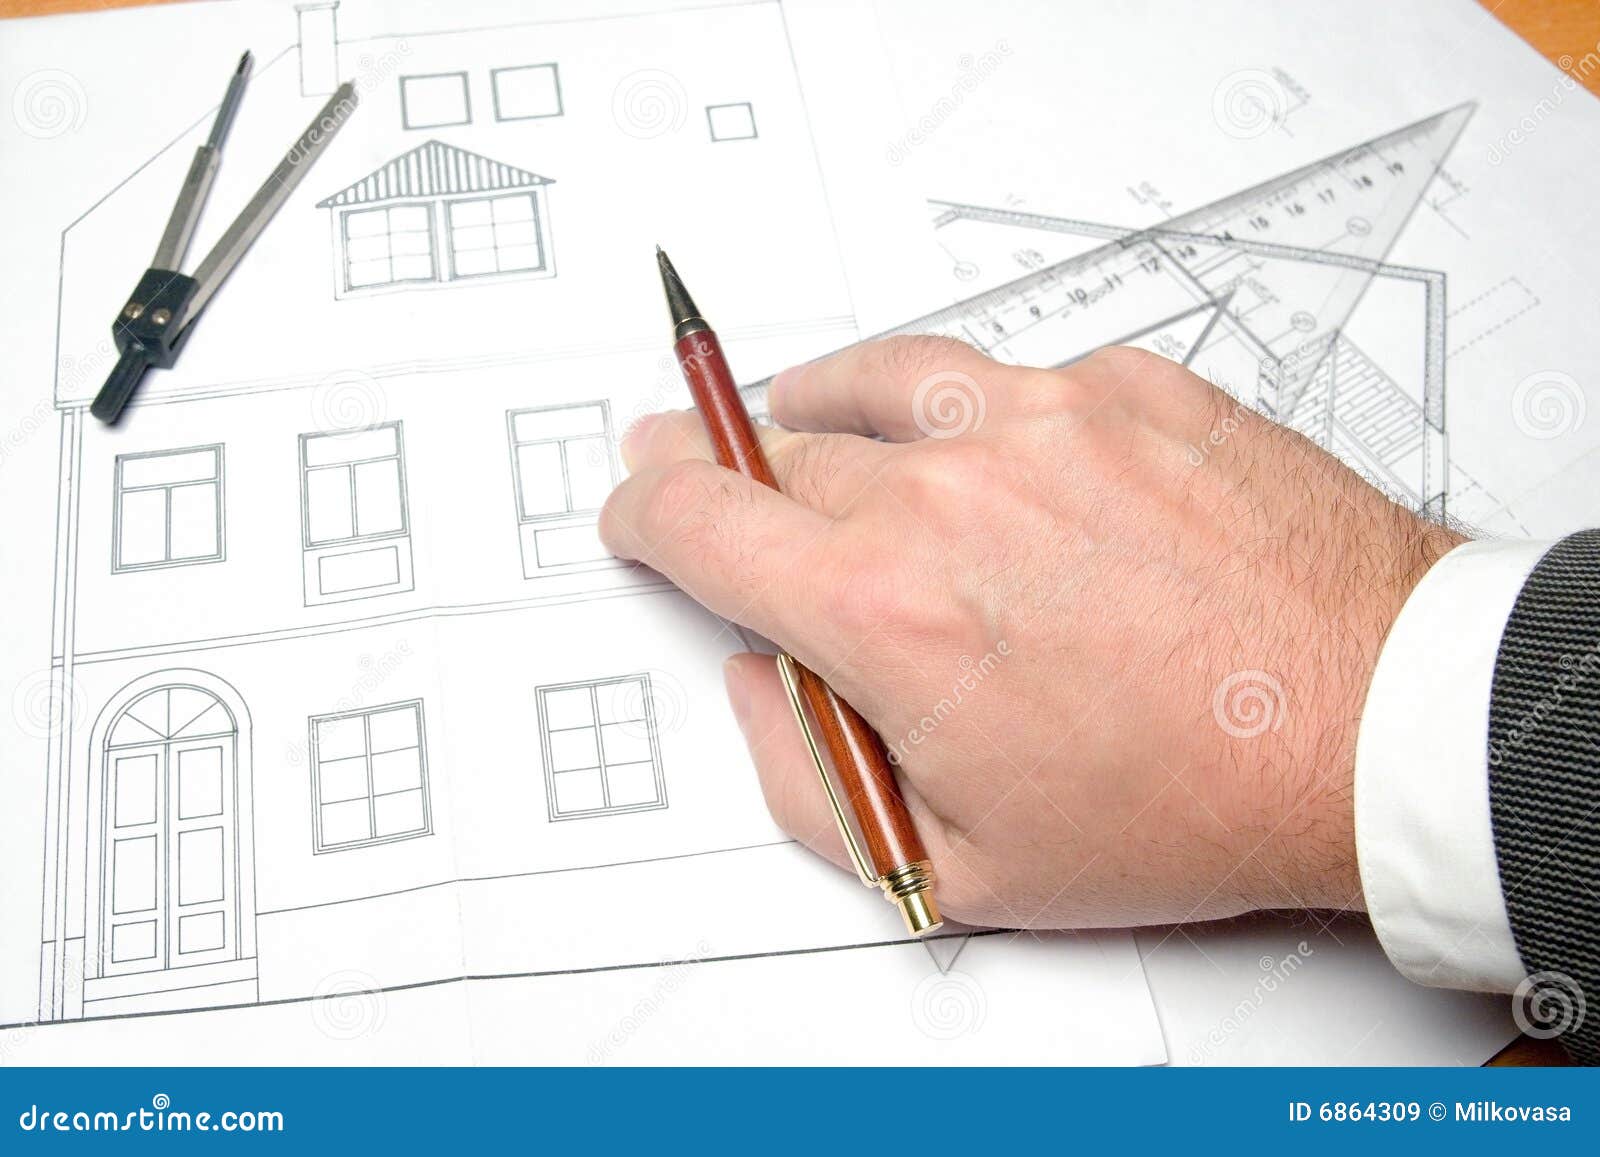 Structural drawing stock image. Image of compass, draftsman - 6864309